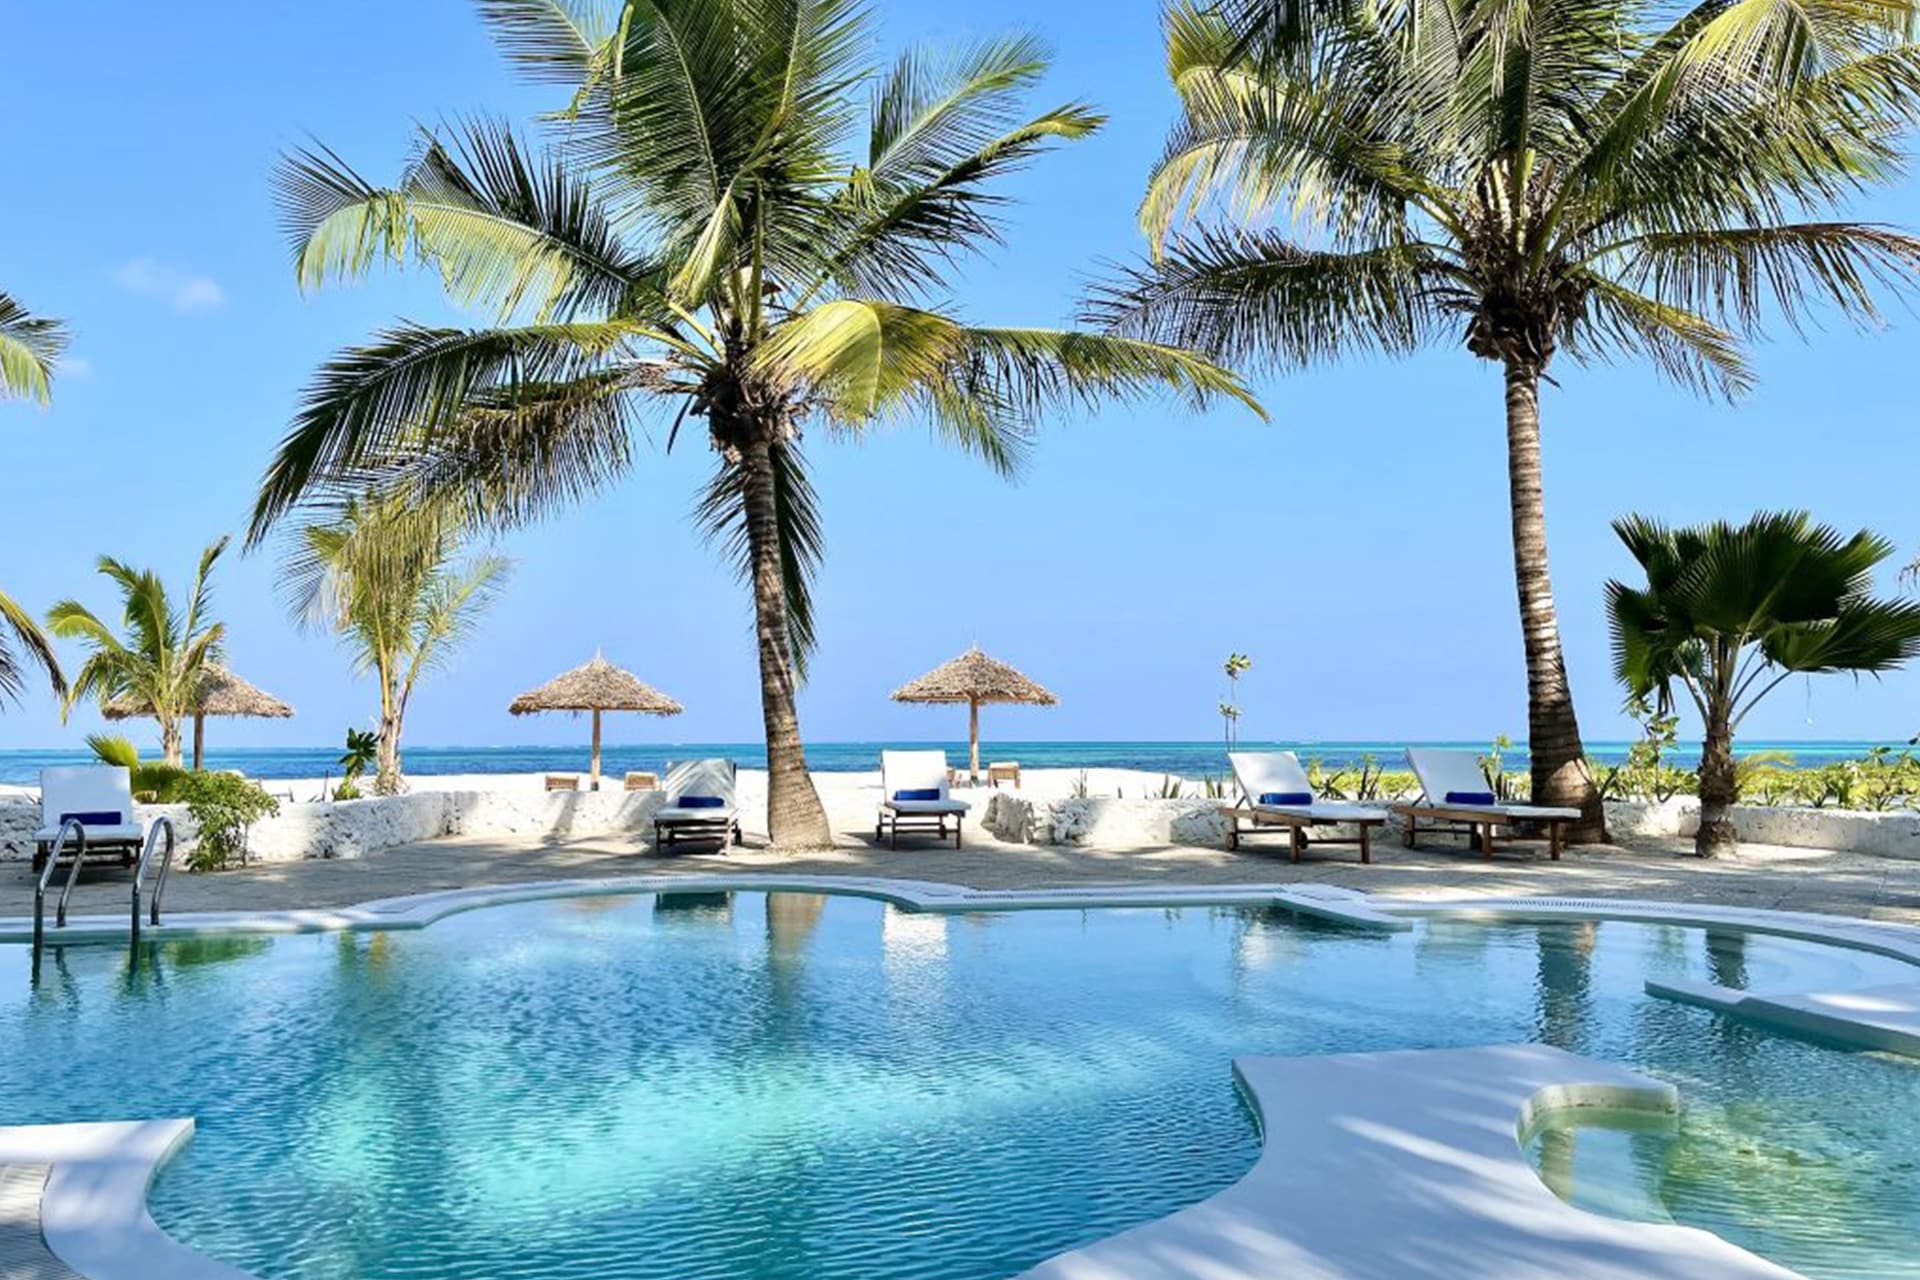 Pool at Amani in Zanzibar, one of the luxury lodges in Africa